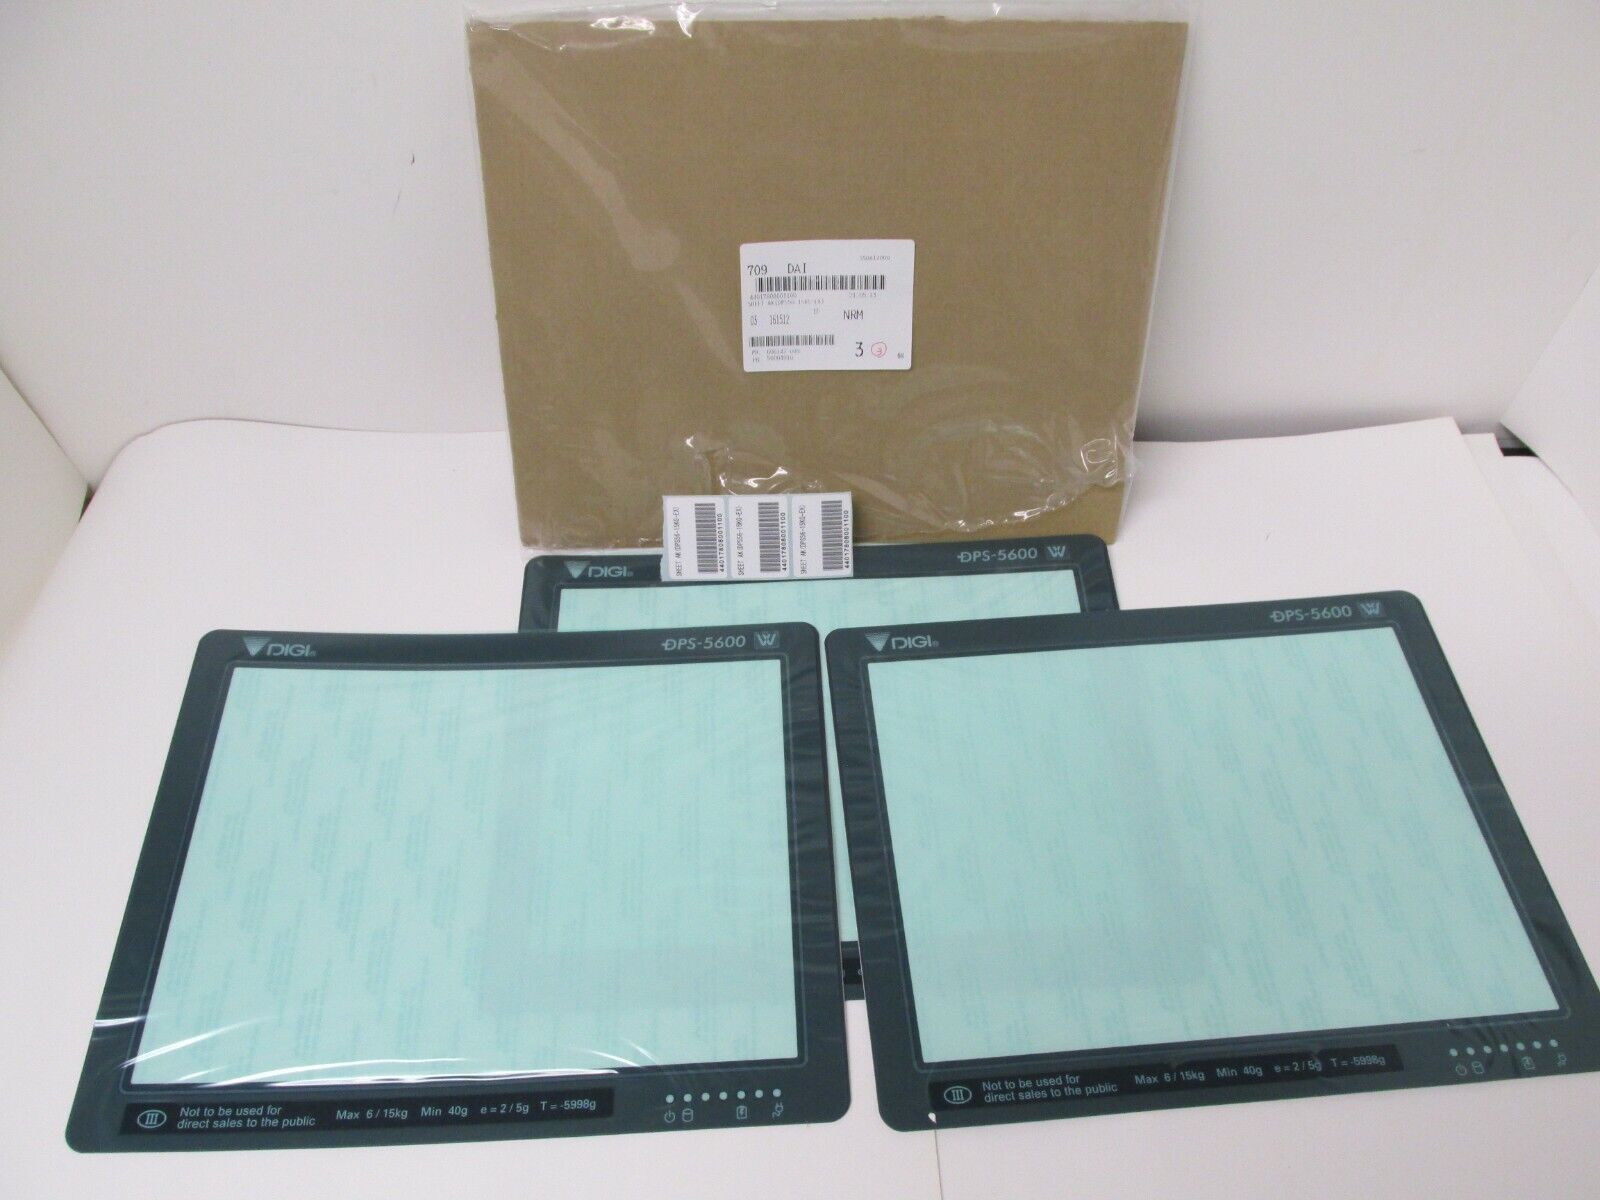 DIGI DPS-5600 Max 46% Ranking TOP6 OFF INDUSTRIAL SCREEN LCD SHEETS COVER DPS56-15KG AK